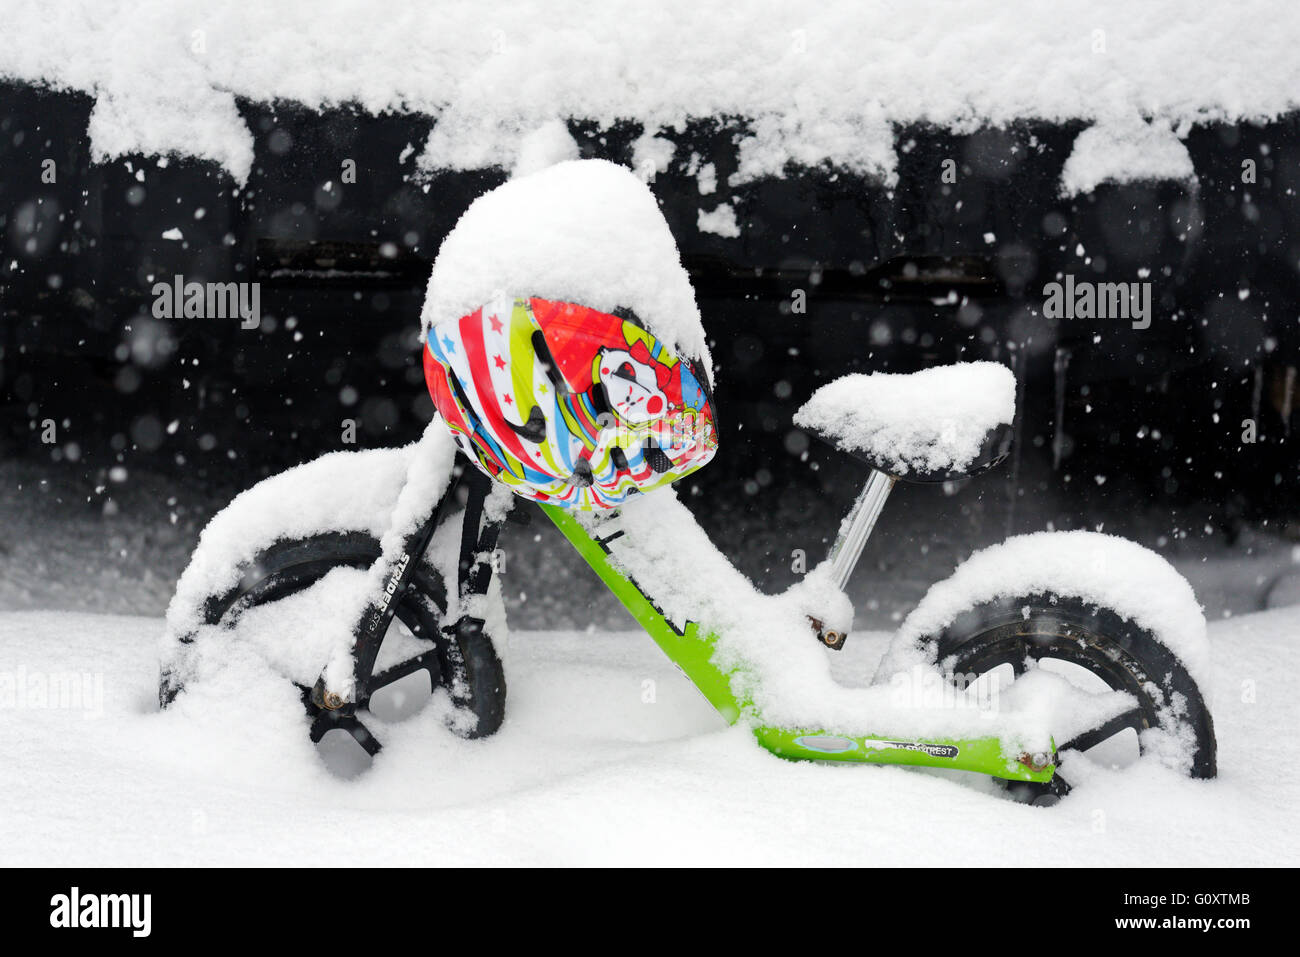 A child's balance bike and helmet covered in snow Stock Photo